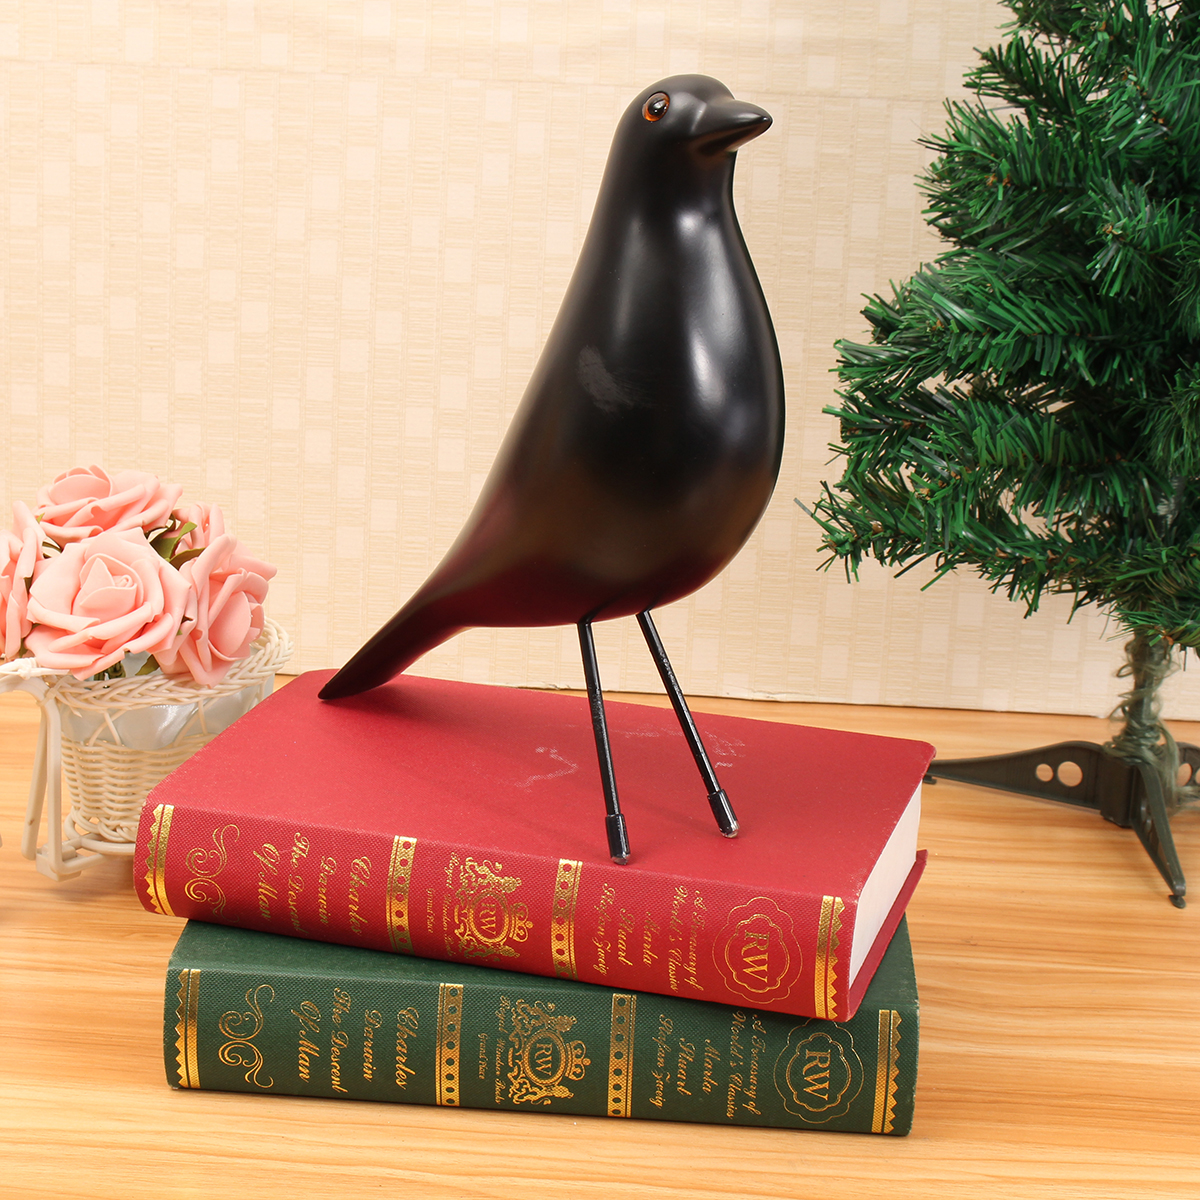 11'' Bird Desk Ornament House Resin Pigeon Gift Office Home Window Table Decorations